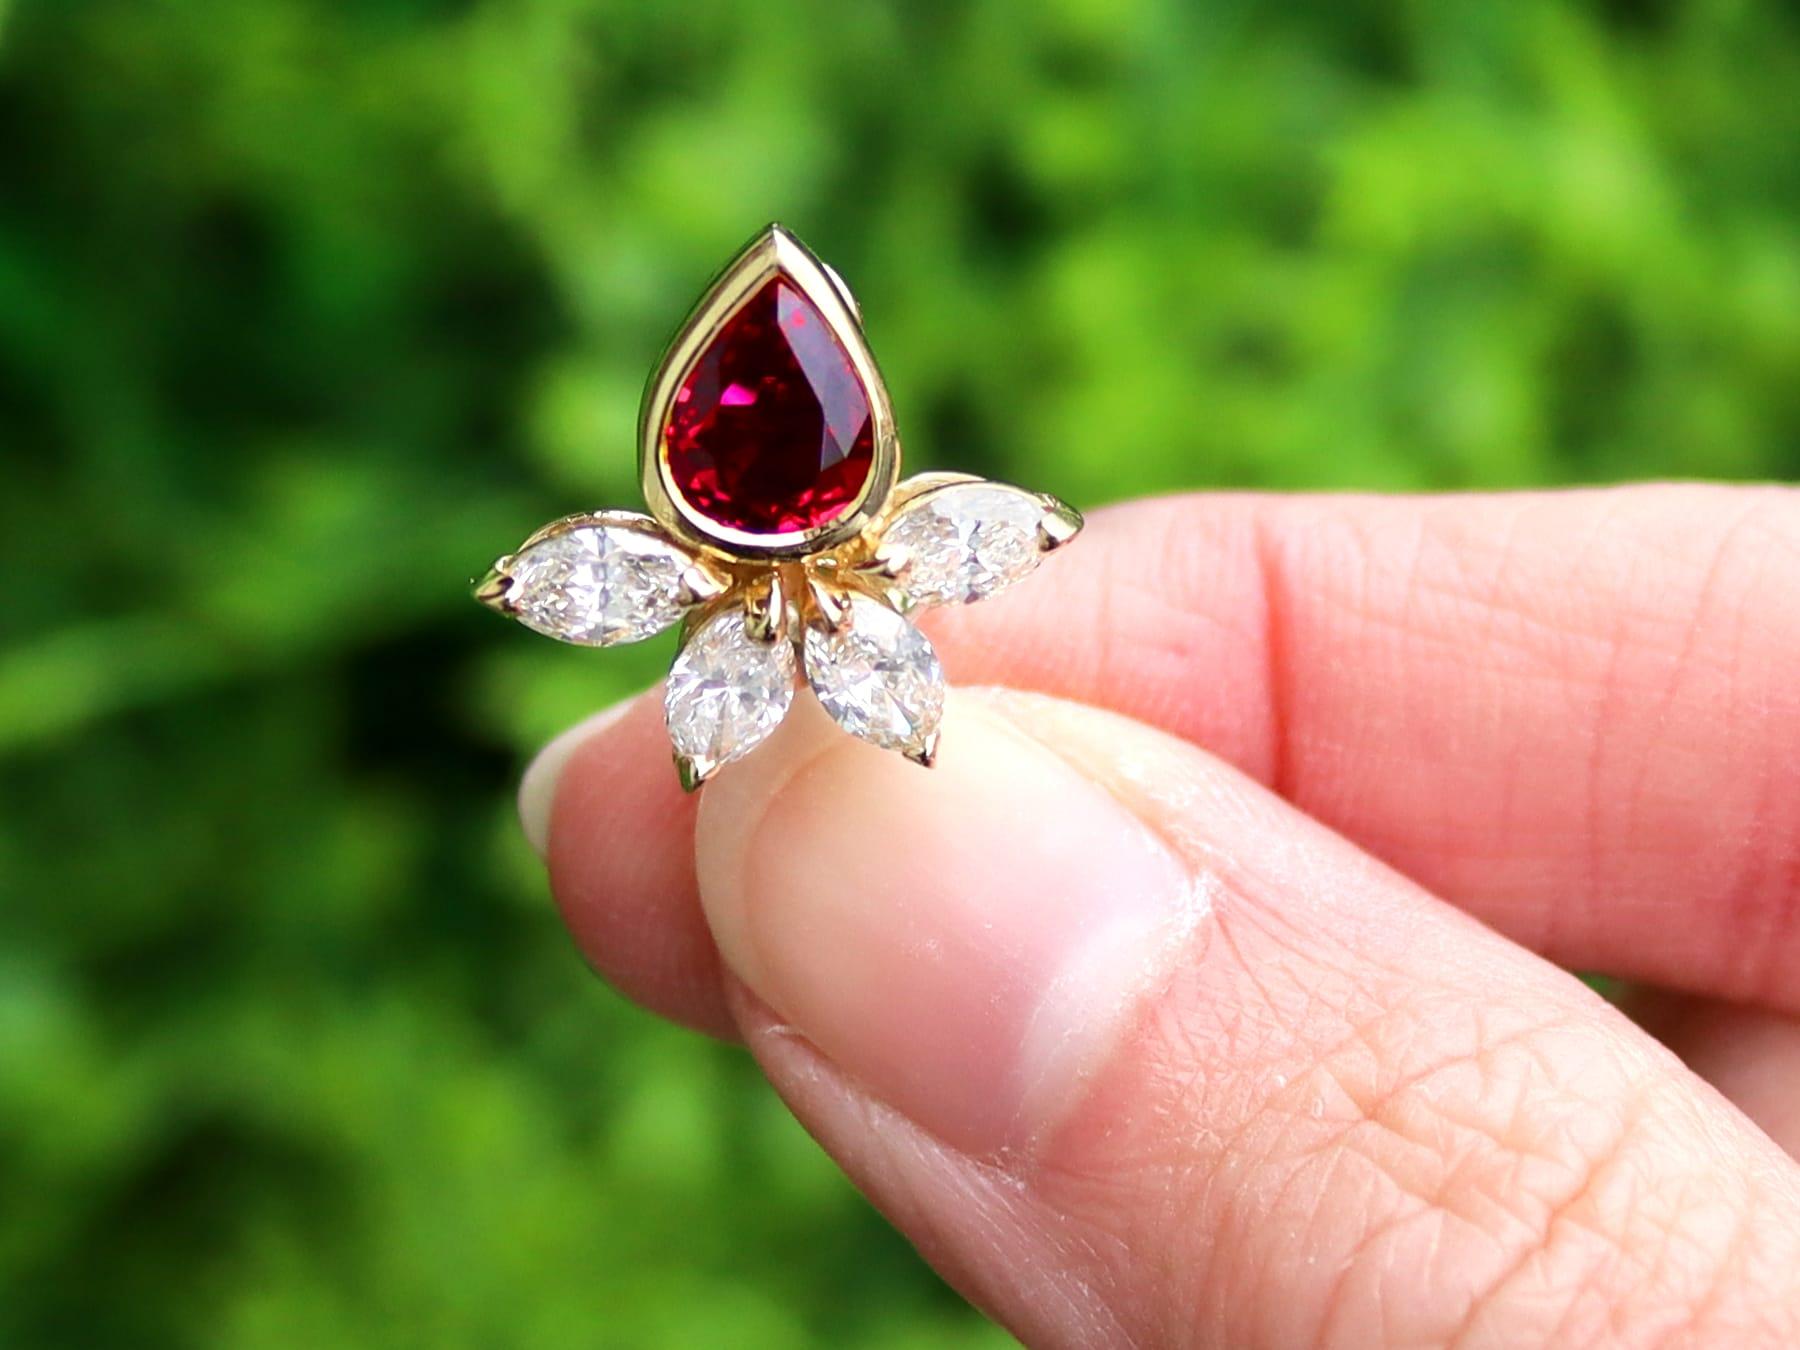 A stunning, fine and impressive pair of vintage Italian 1.90 carat ruby and 2.20 carat diamond, 18 karat yellow stud earrings; part of our diverse vintage ruby jewellery collections

These fine and impressive vintage ruby earrings have been crafted